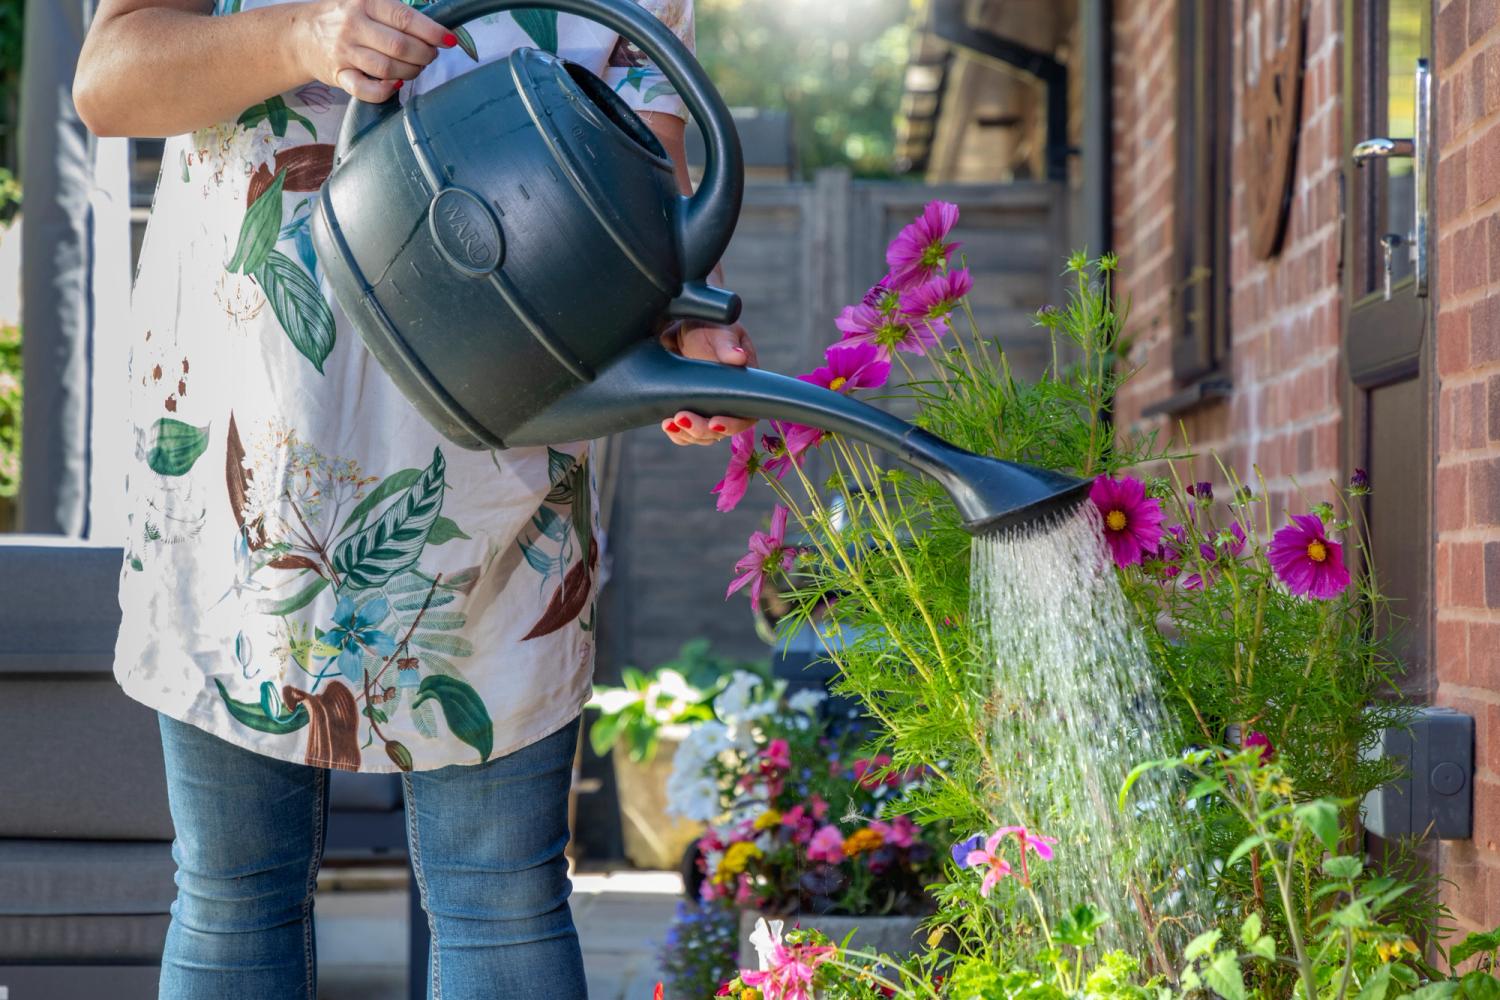 A person watering plants with a watering can